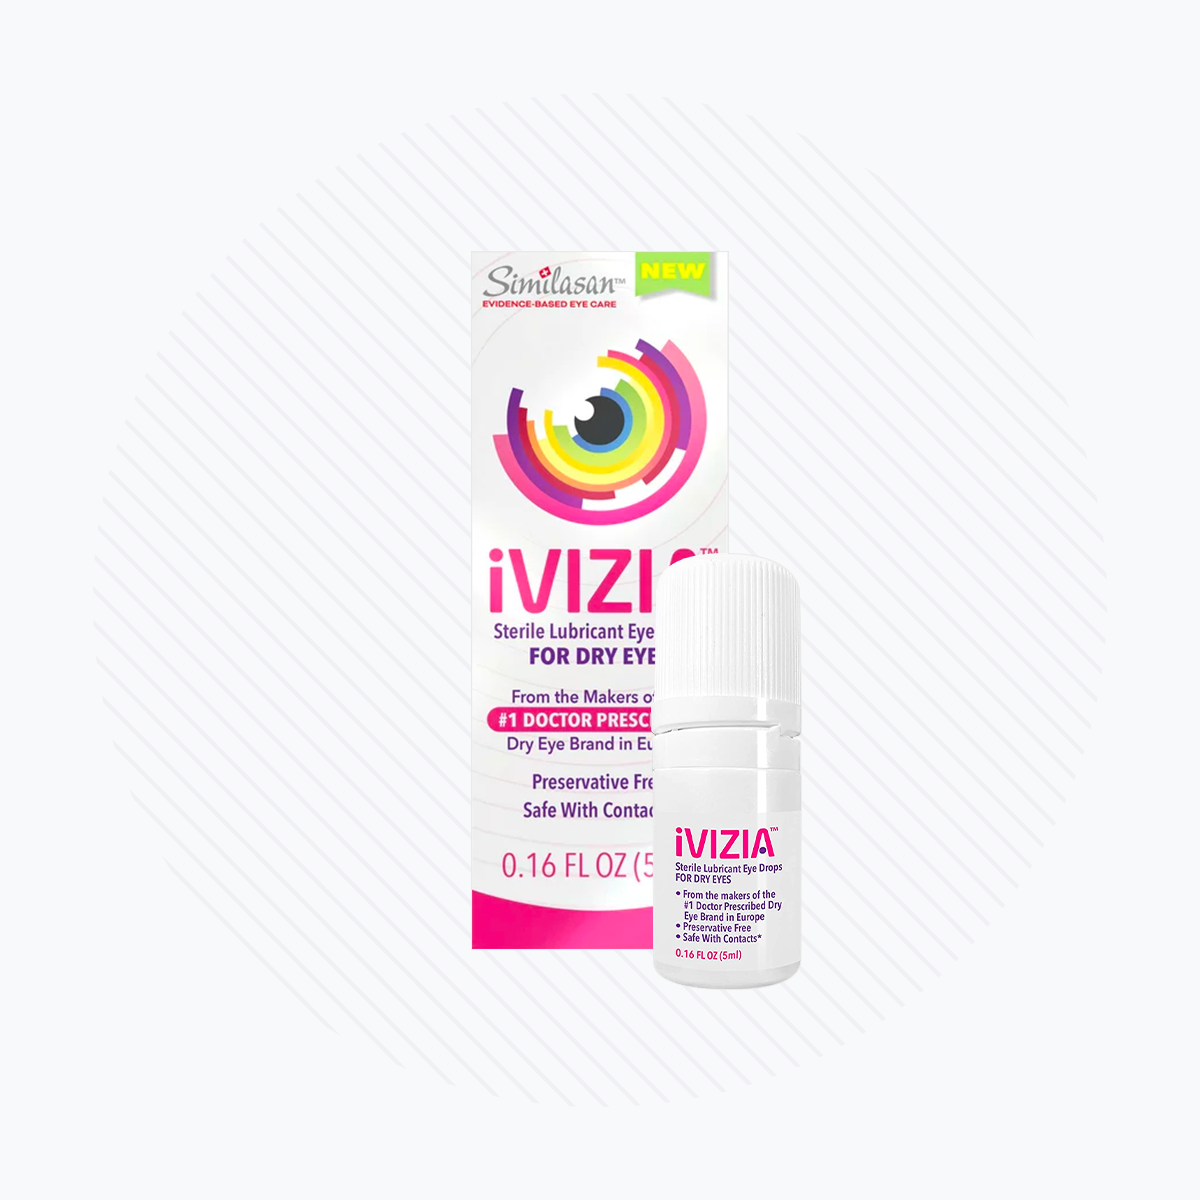 iVIZIA Sterile Lubricant Eye Drops for Dry Eyes, Preservative-Free, Dry Eye Relief, Contact Lens Friendly, 0.17 fl oz (5ml bottle)